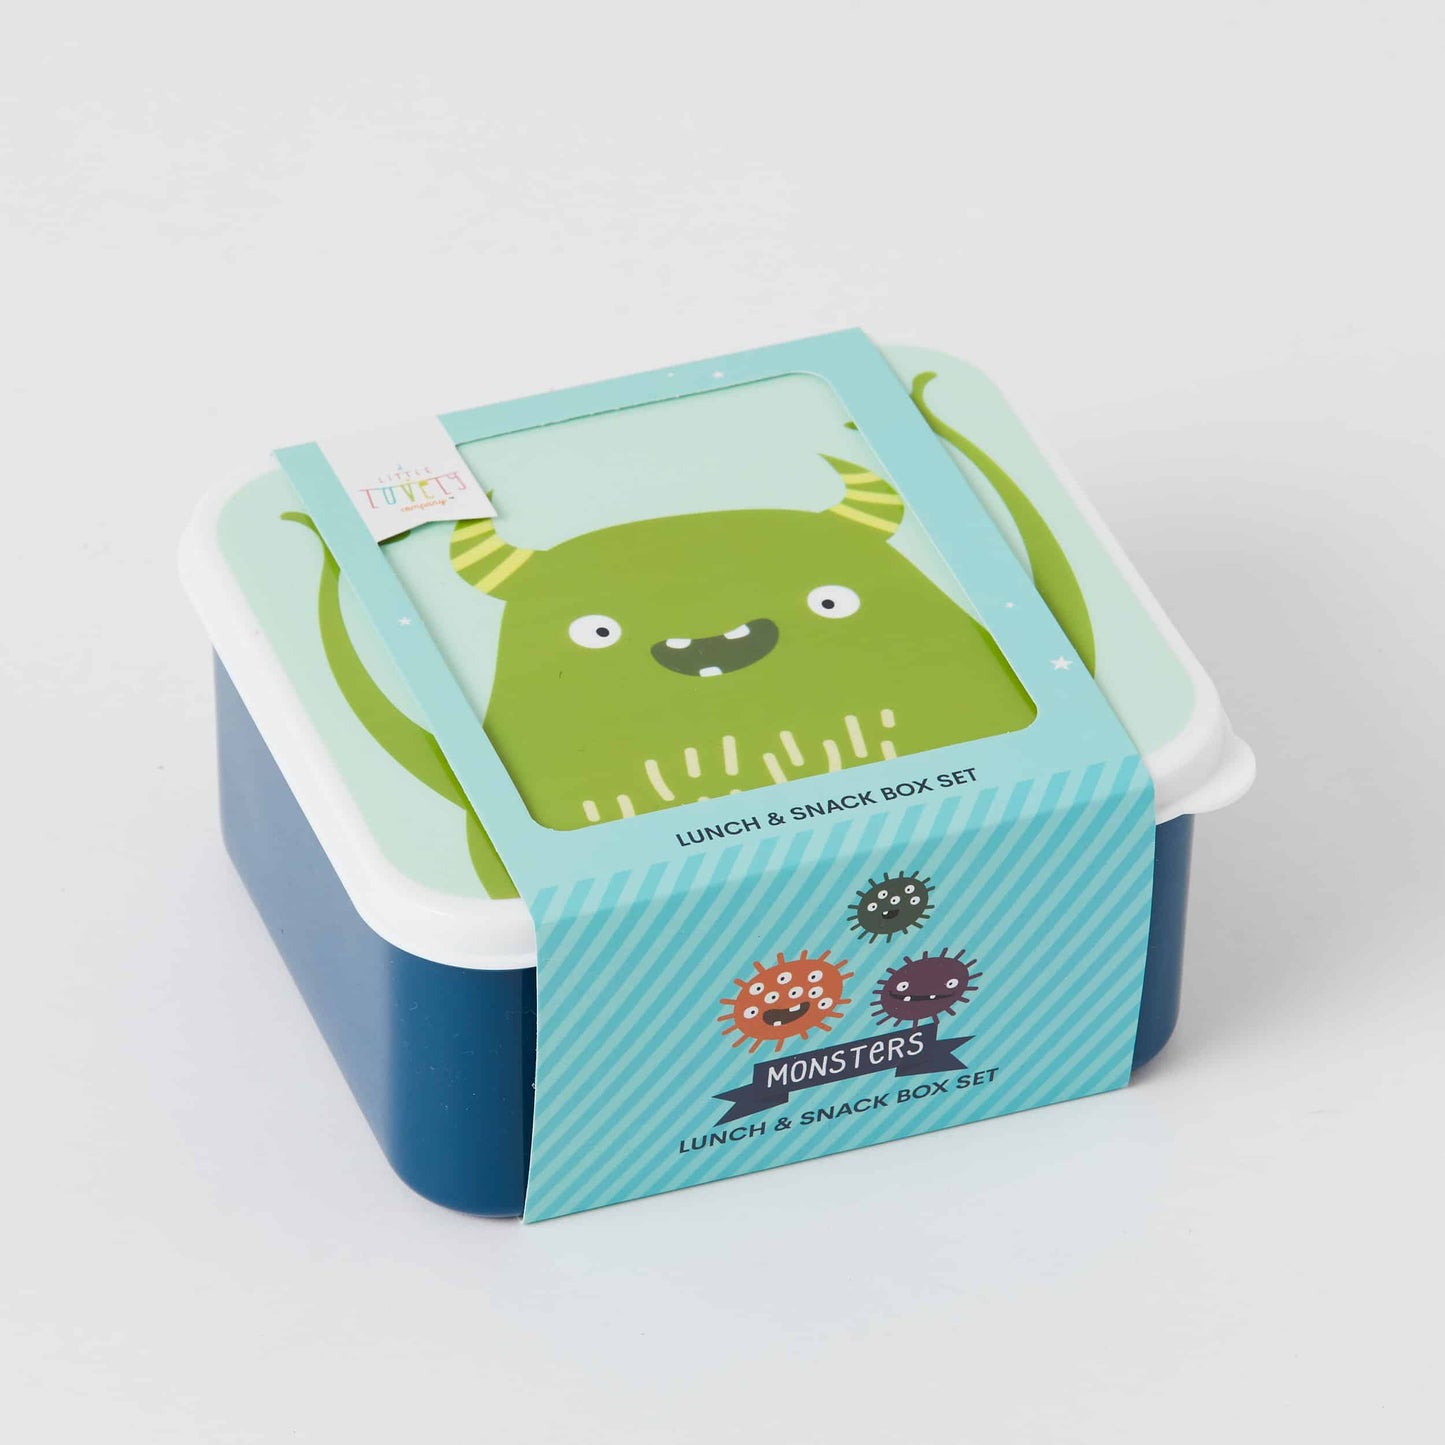 Monsters Lunch & Snack Box Set of 4